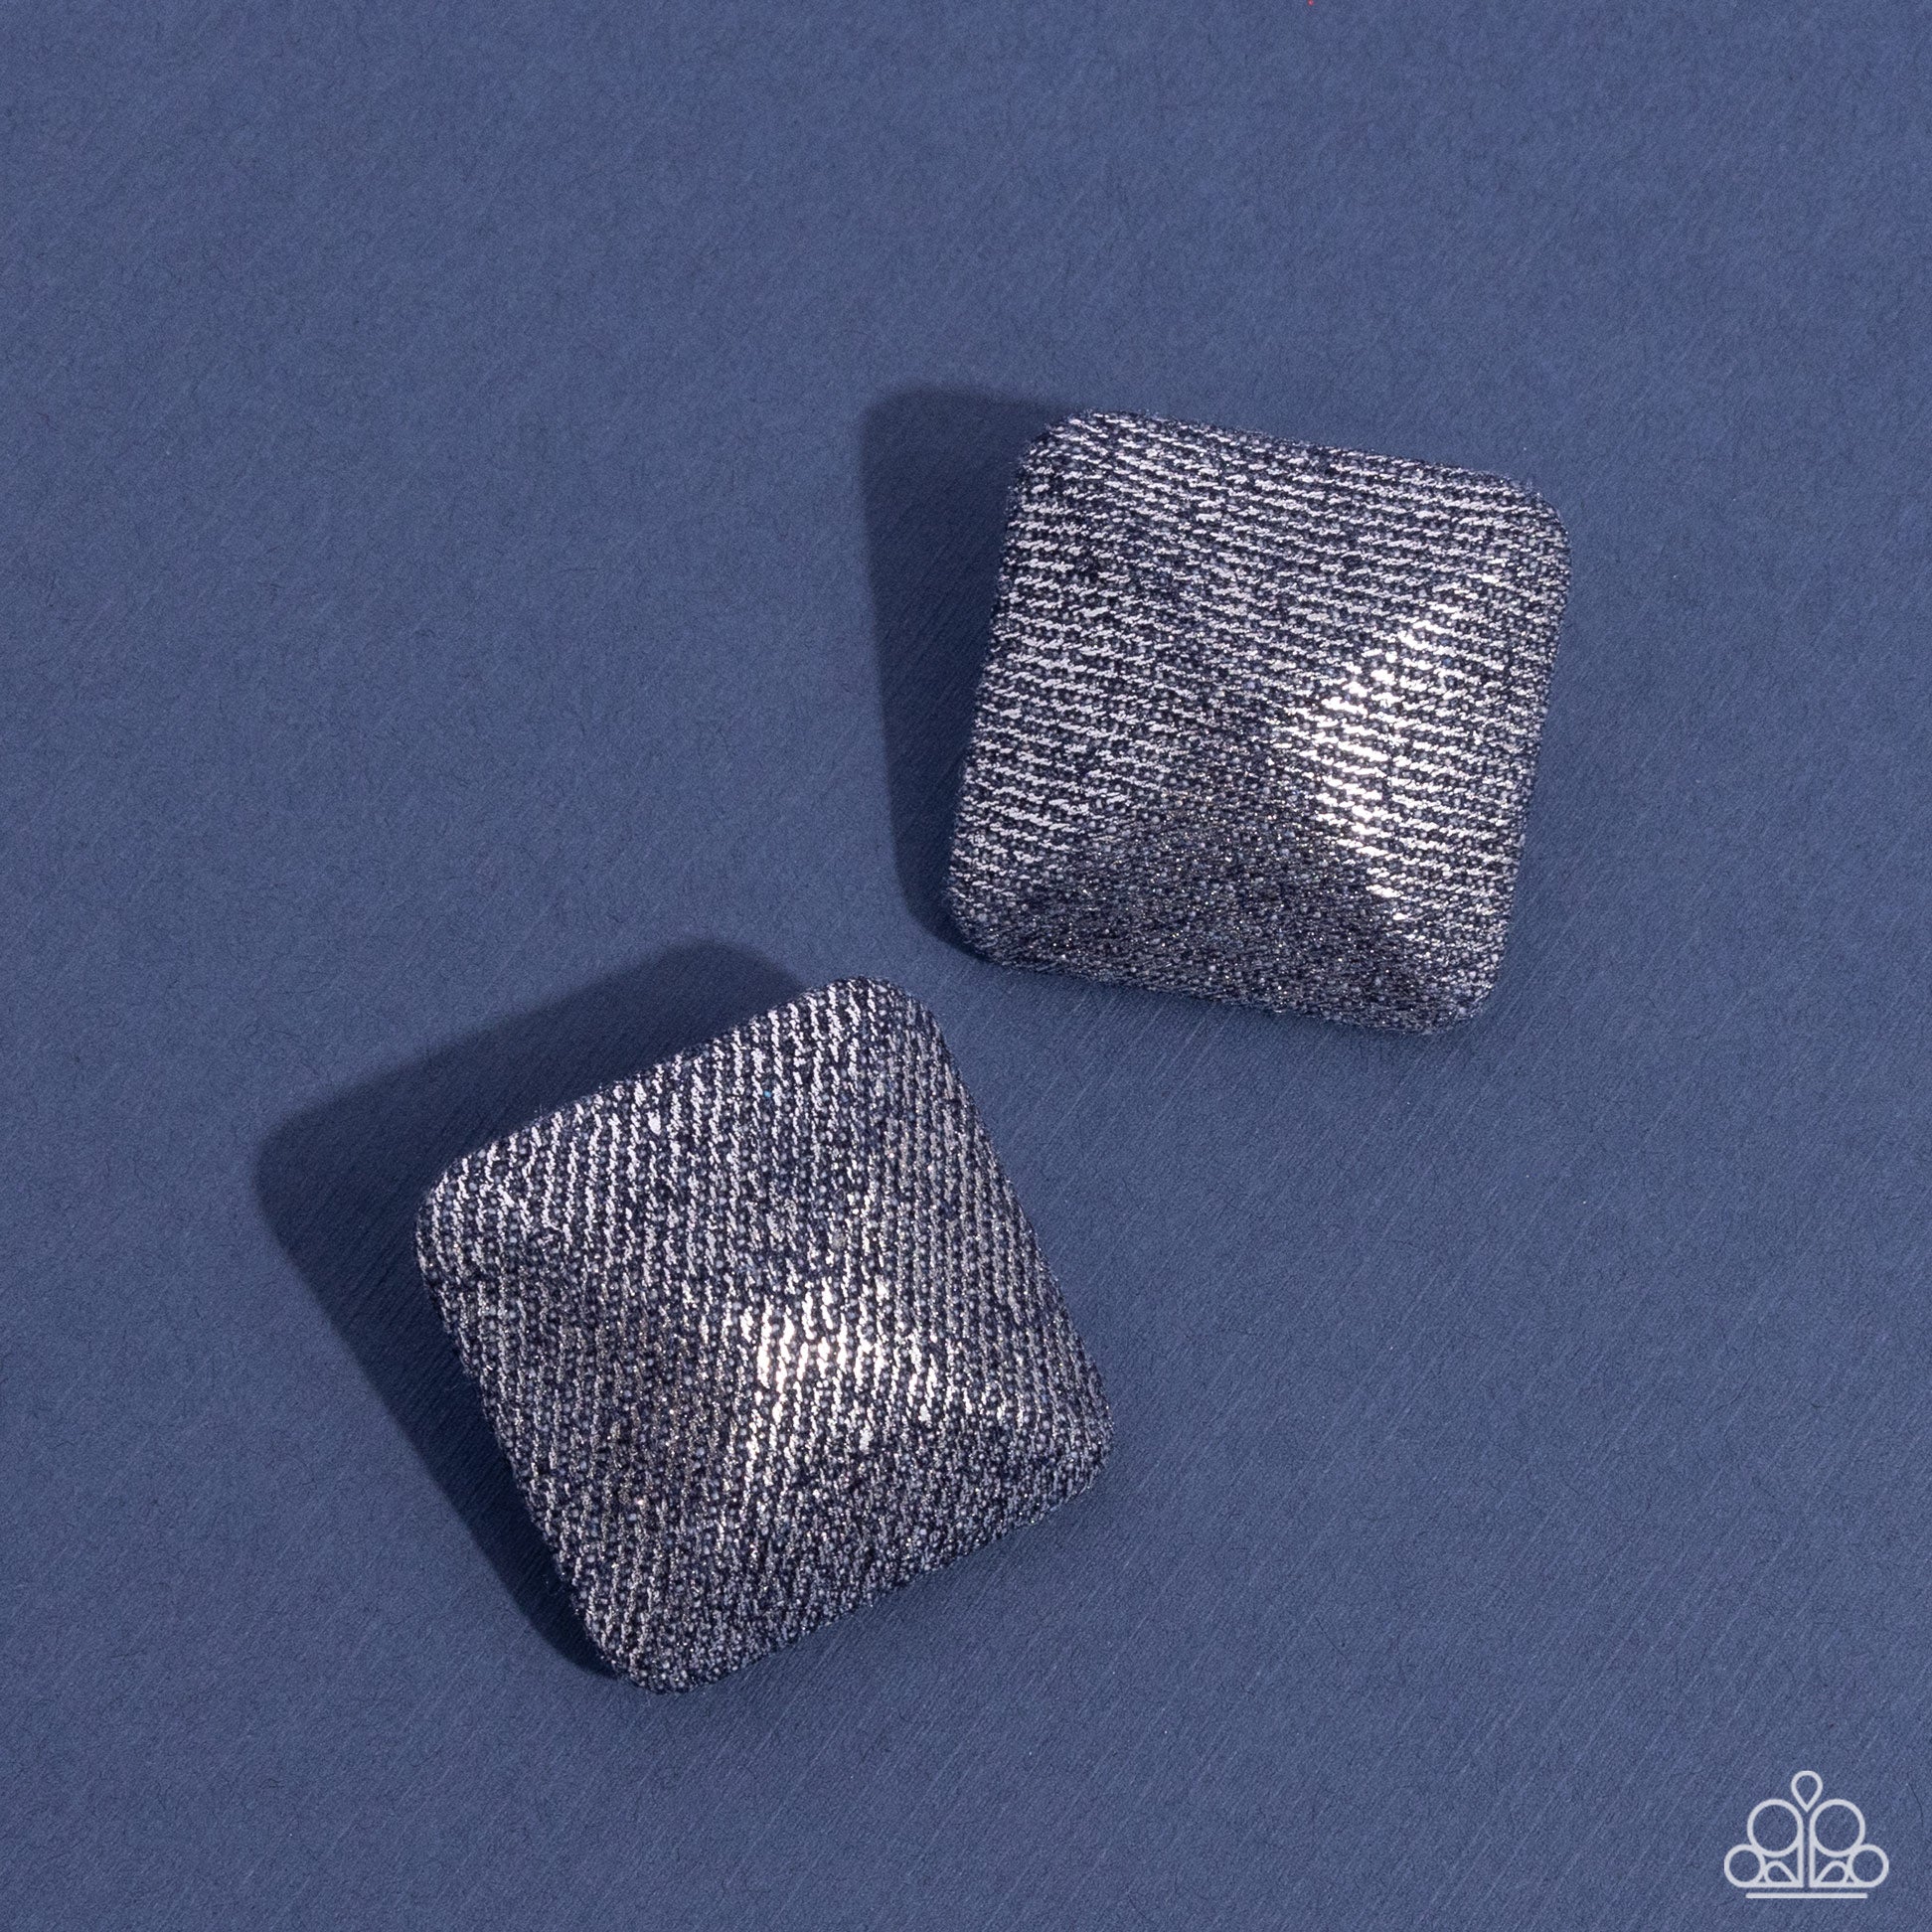 <p>Paparazzi Accessories - Commercially Corporate - Silver Earrings featuring a fabric-like texture, metallic silver squares reflect light off every rounded surface for a corporate-inspired design. Earring attaches to a standard post fitting.</p> <p><i>Sold as one pair of post earrings.</i></p>